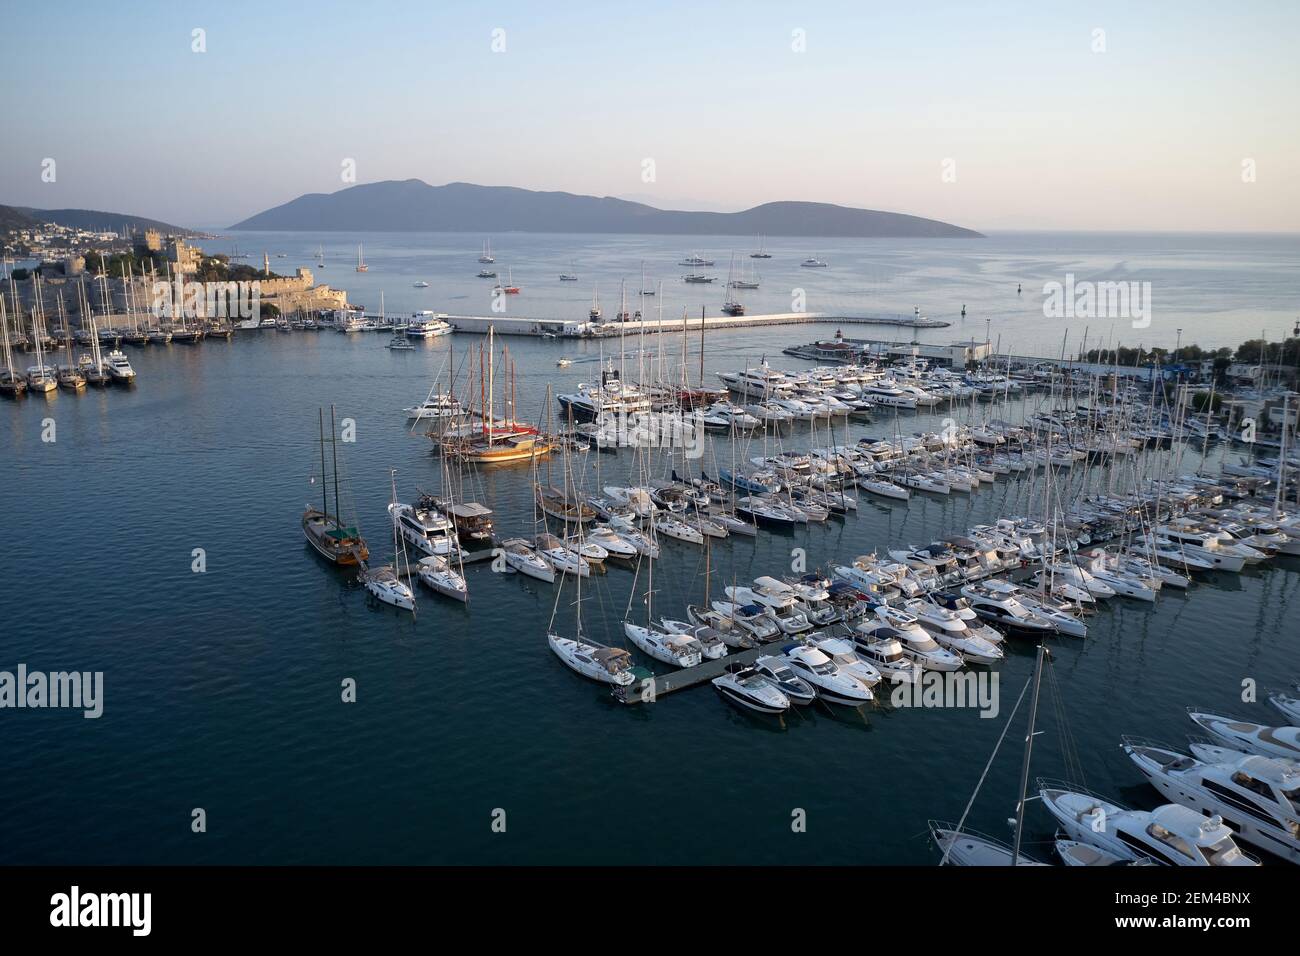 View of Bodrum harbor and castle of St. Peter. Stock Photo